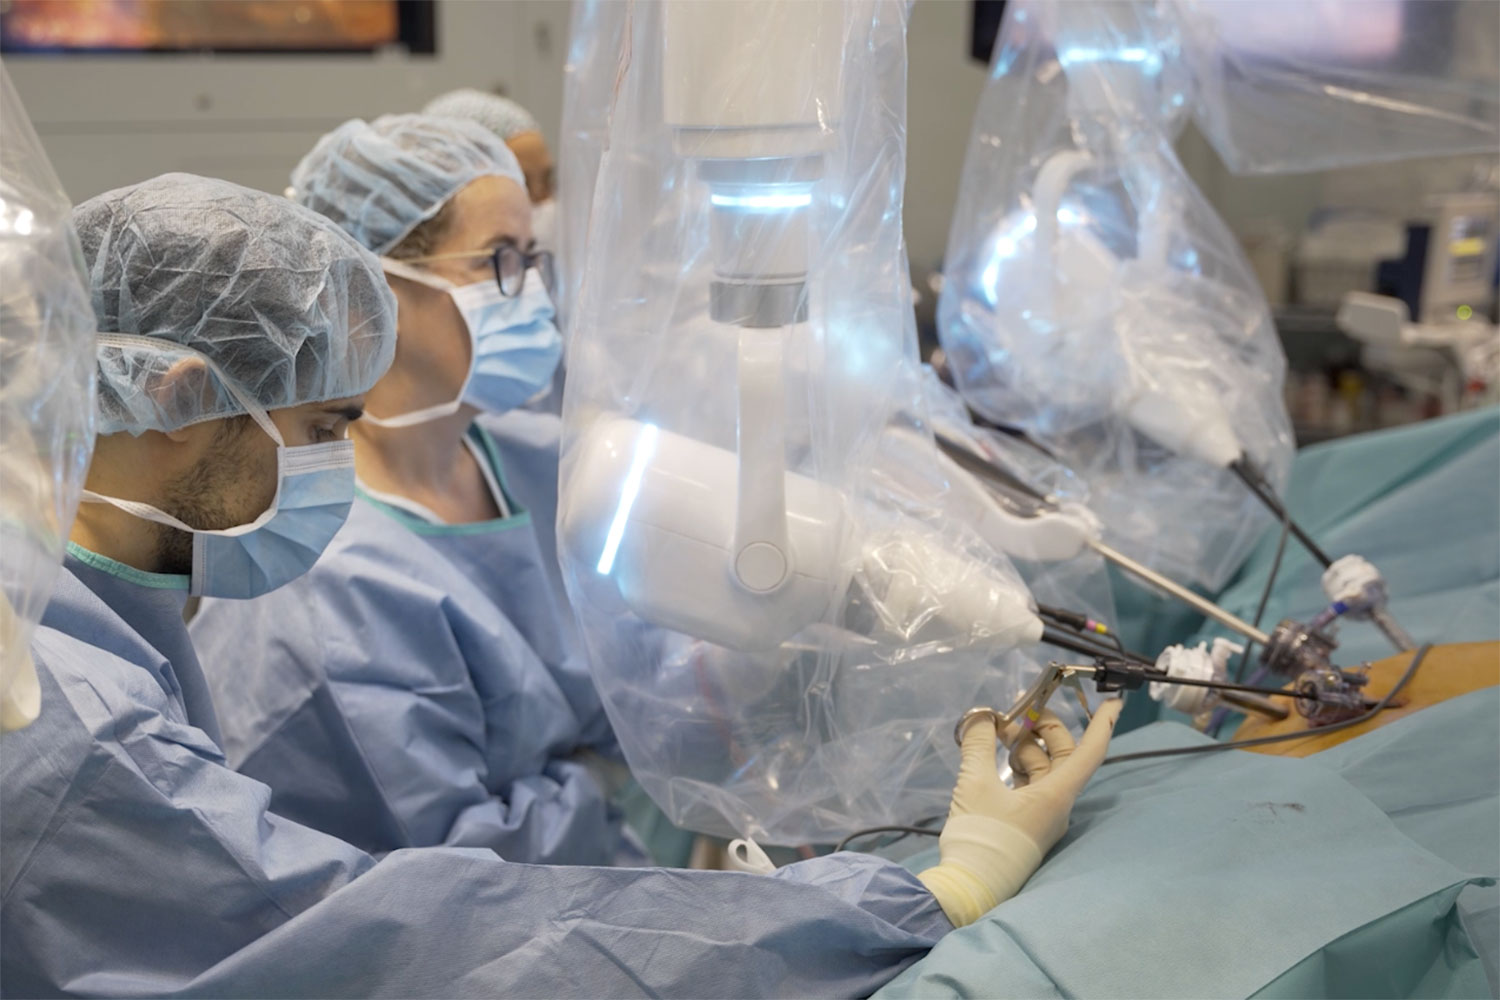 THE HOSPITAL CLÍNIC SUCCESSFULLY PERFORMS THE FIRST SURGERIES WITH THE ROB SURGICAL SURGICAL ROBOT